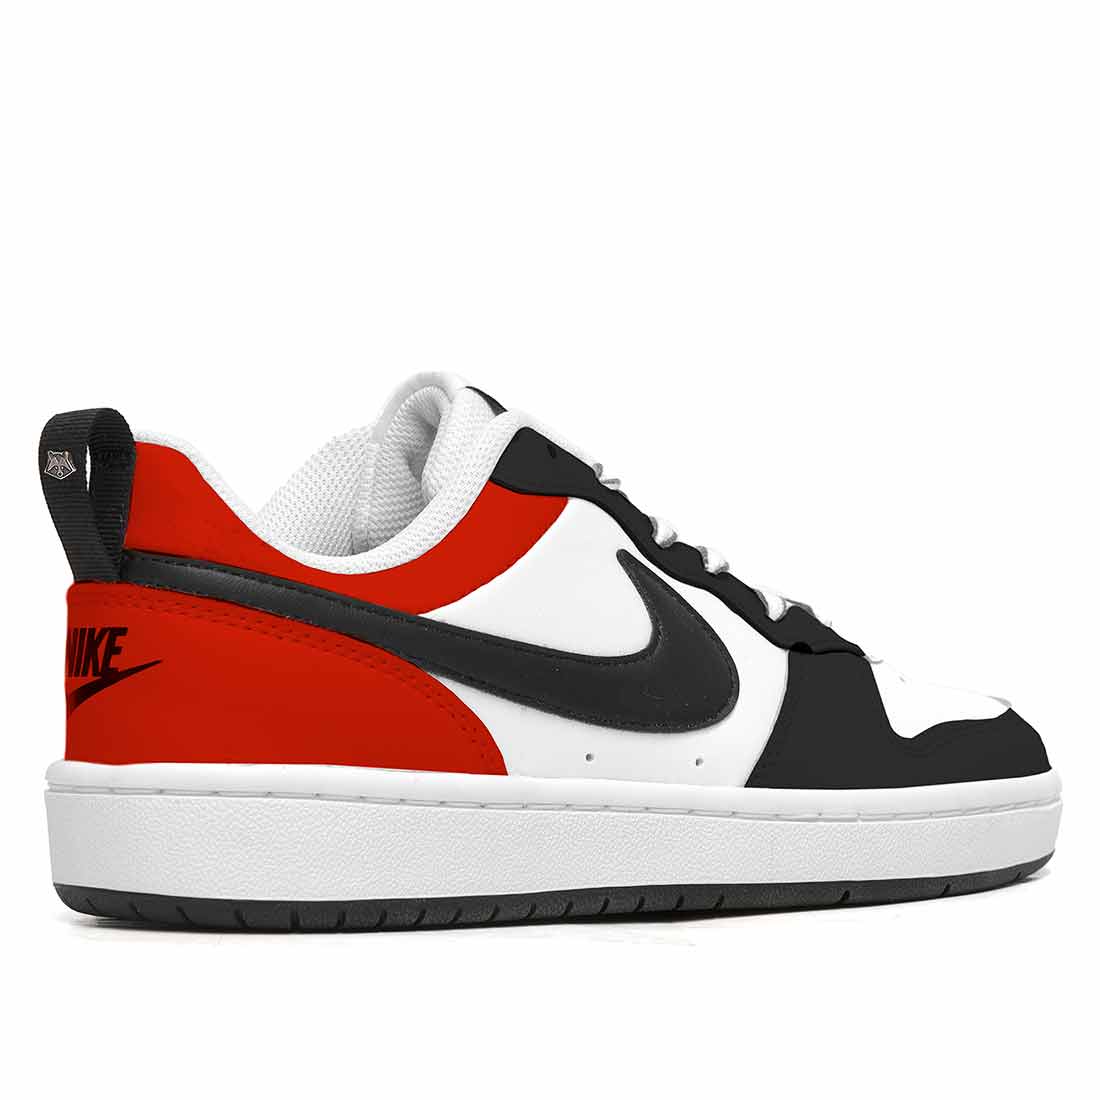 nike court low rosse nere e bianche chiacago